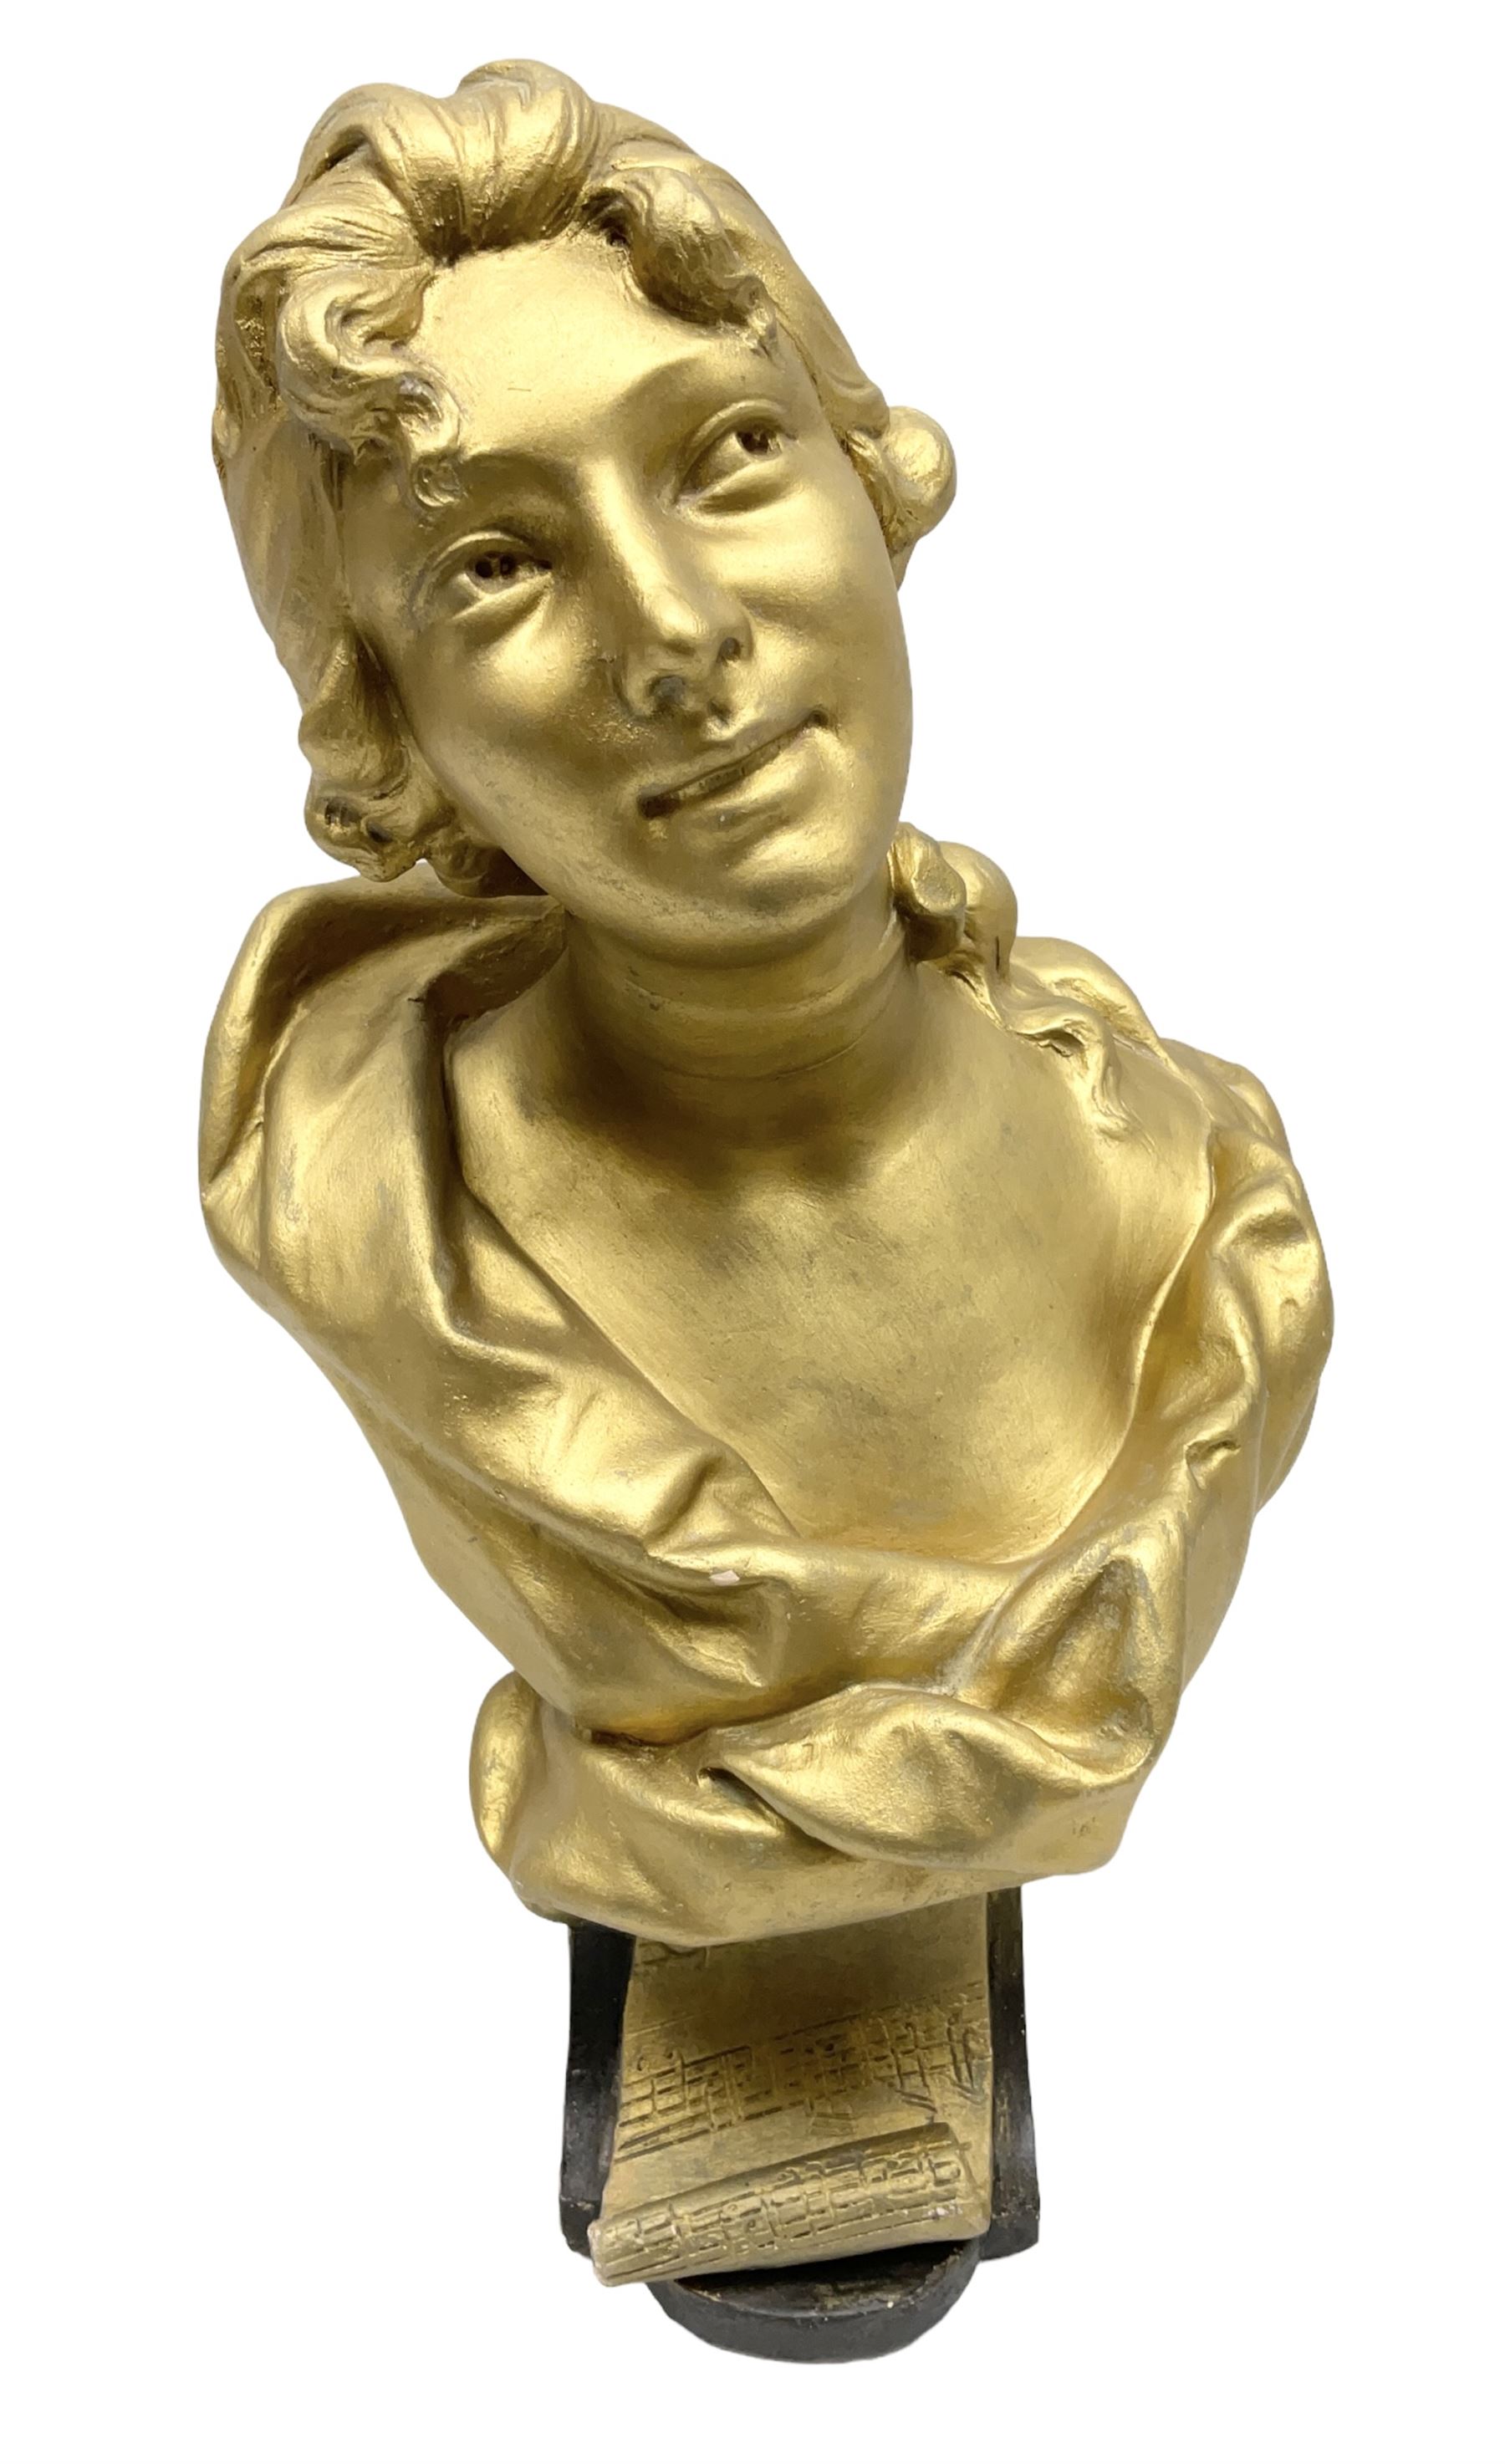 Gilt bust of a classical style male figure